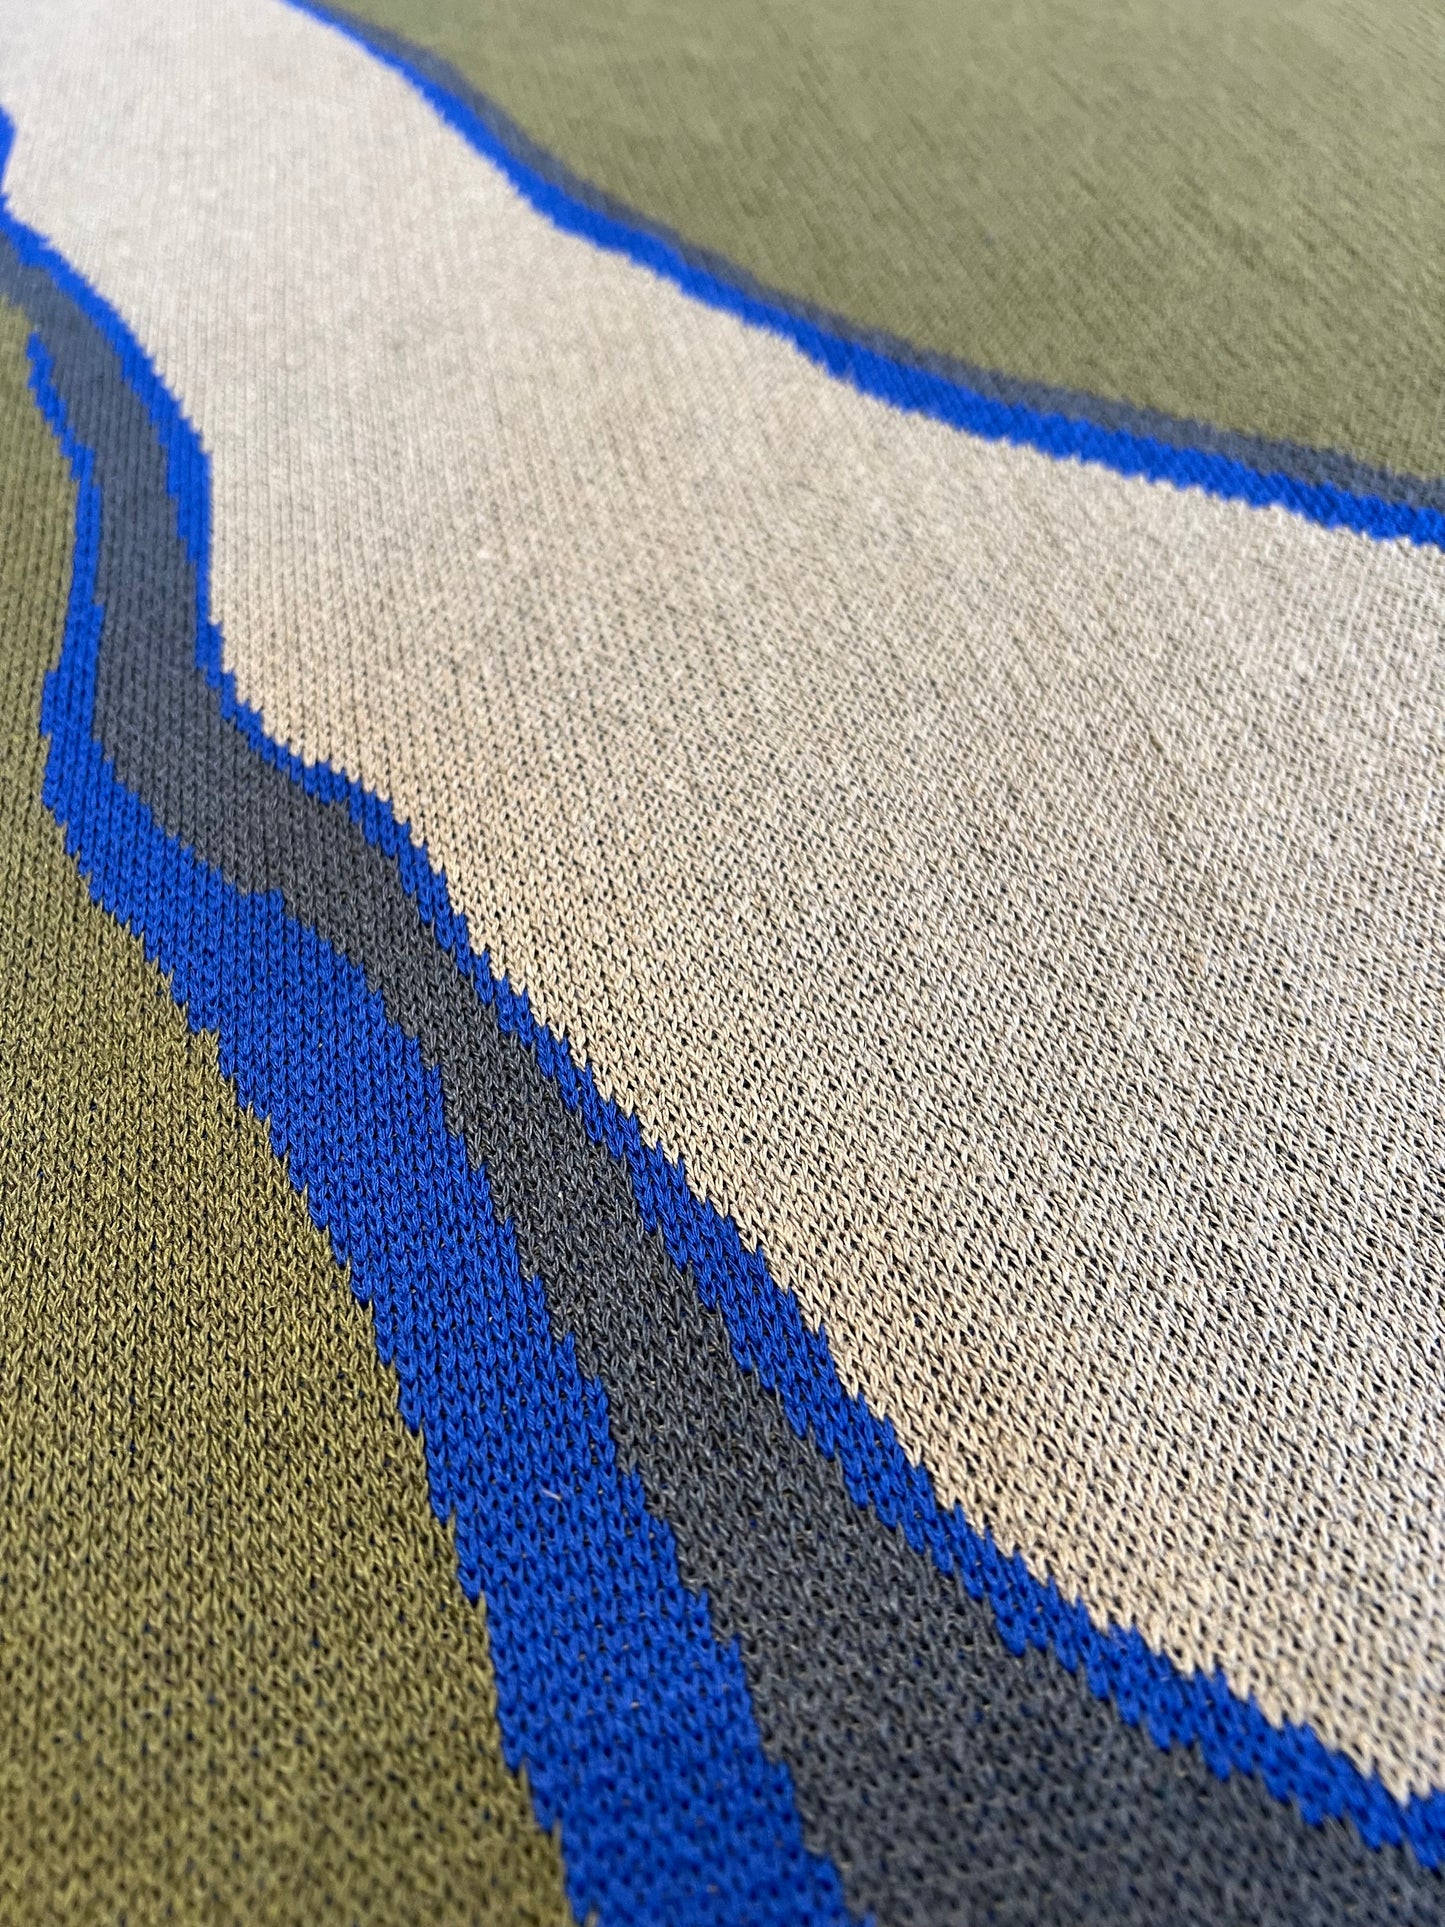 Large Forms Blanket / Khaki and Royal Blue